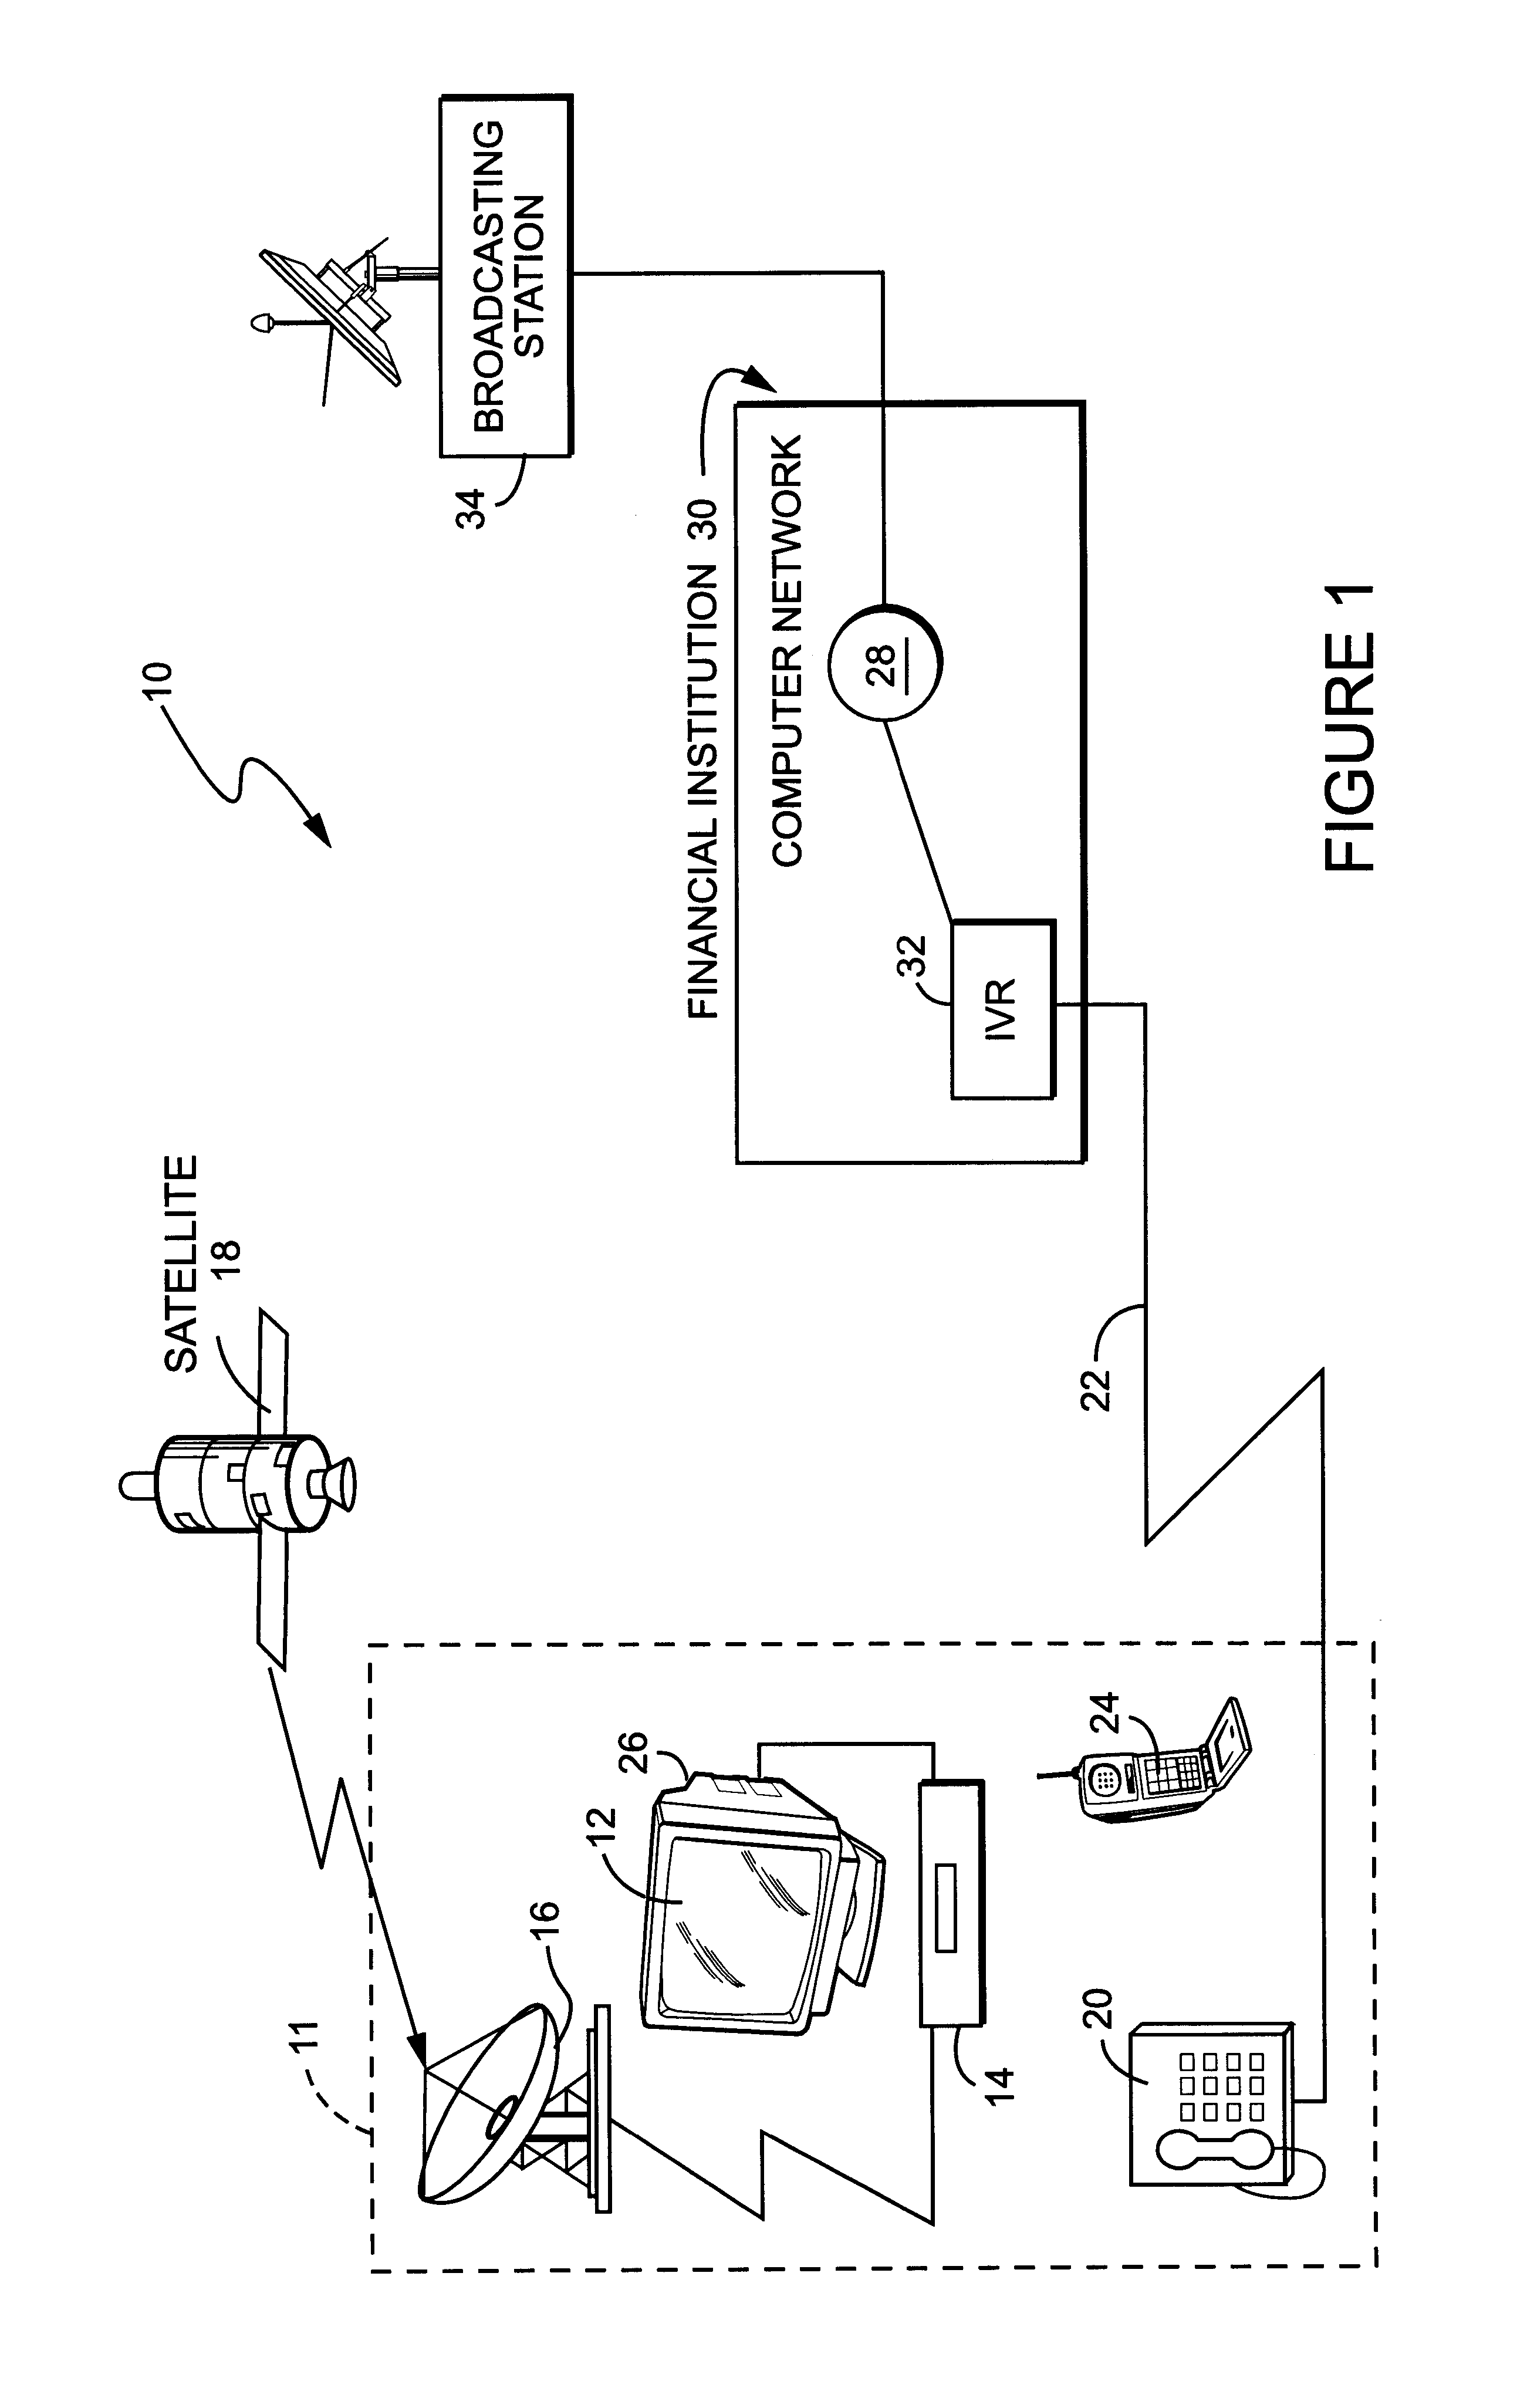 Interactive system for and method of performing financial transactions from a user base